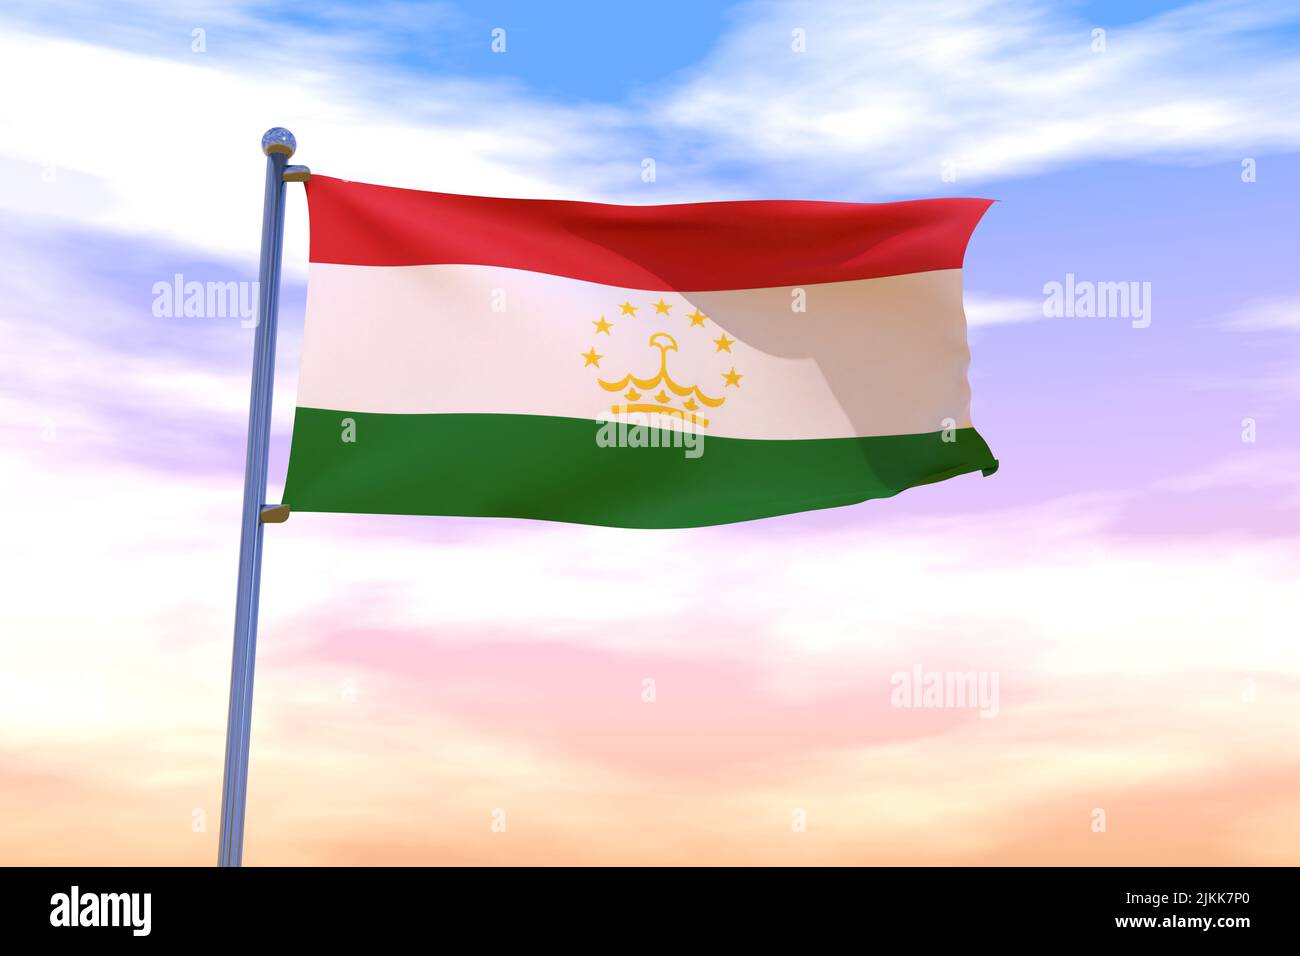 Waving flag of Tajikistan with chrome flag pole in blue sky waving in the wind. High resolution flag with clarity. 3D illustration Stock Photo